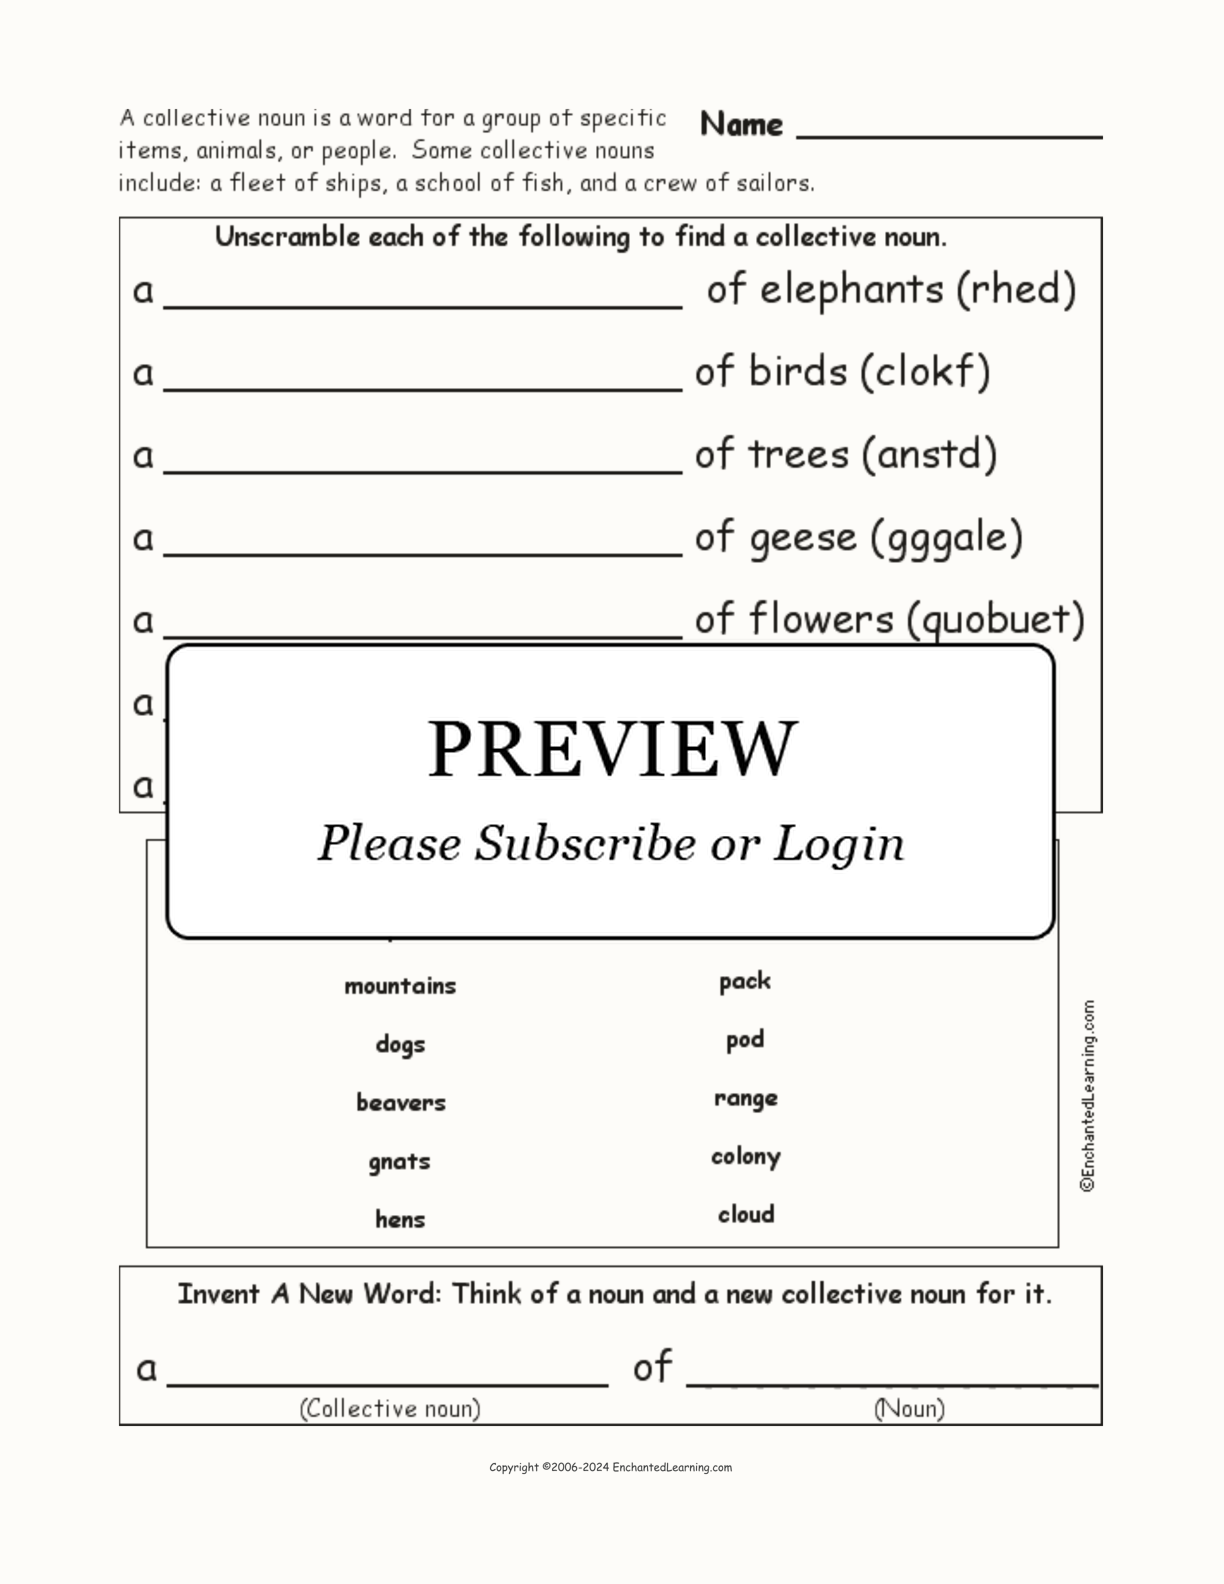 collective-nouns-worksheet-enchanted-learning